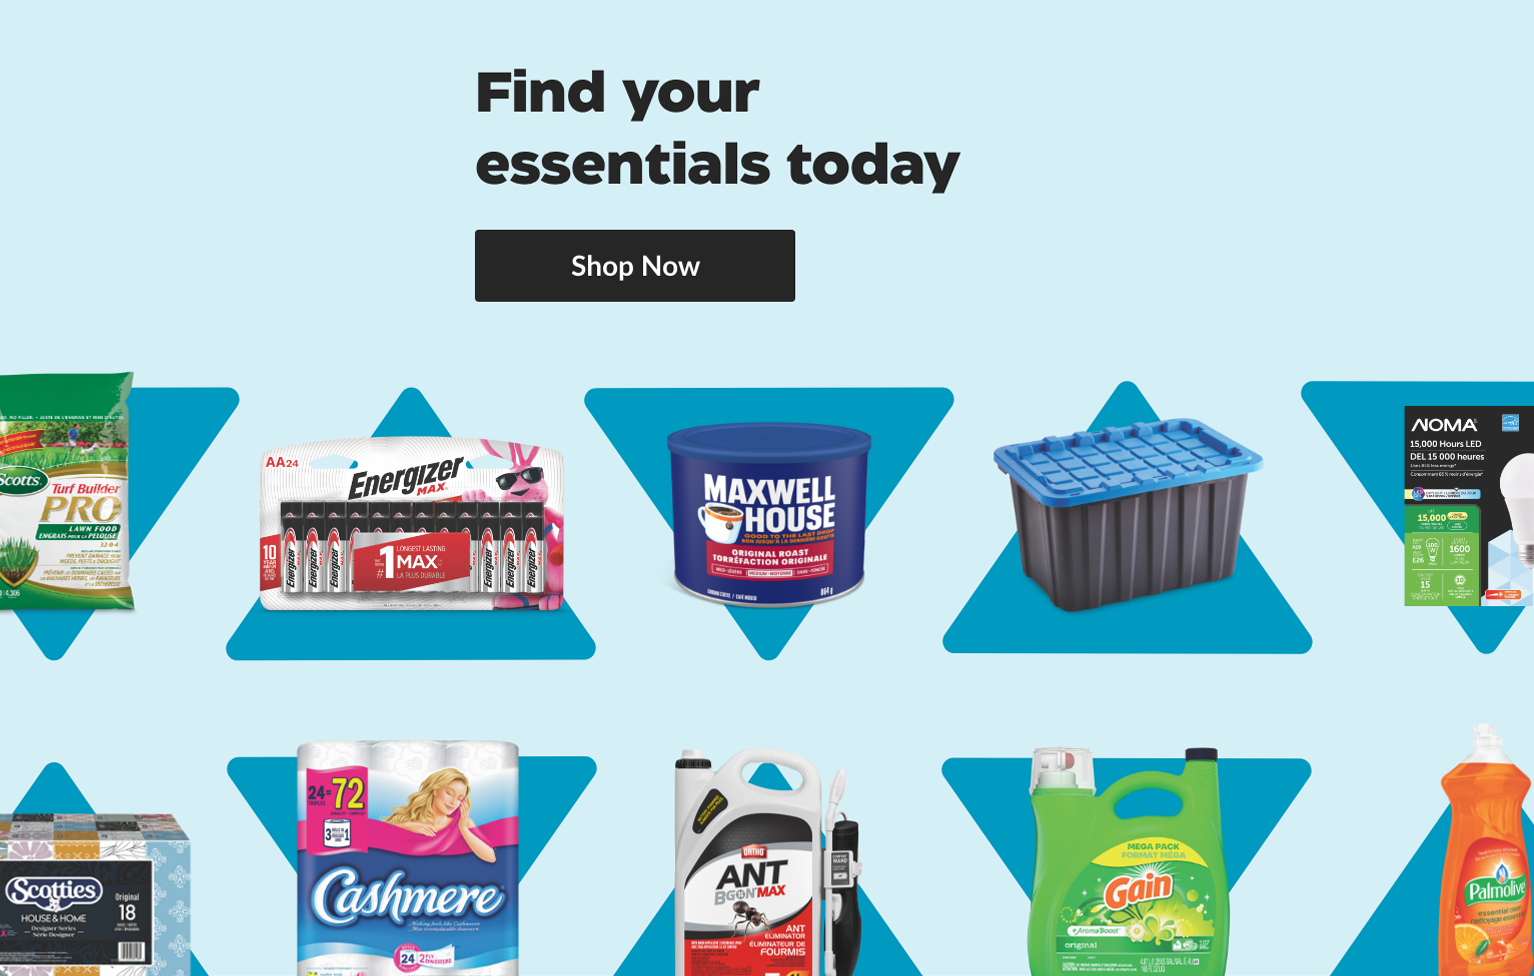 Various household products including Energizer batteries, Gain liquid laundry detergent and more around a “Find your essentials today” title.